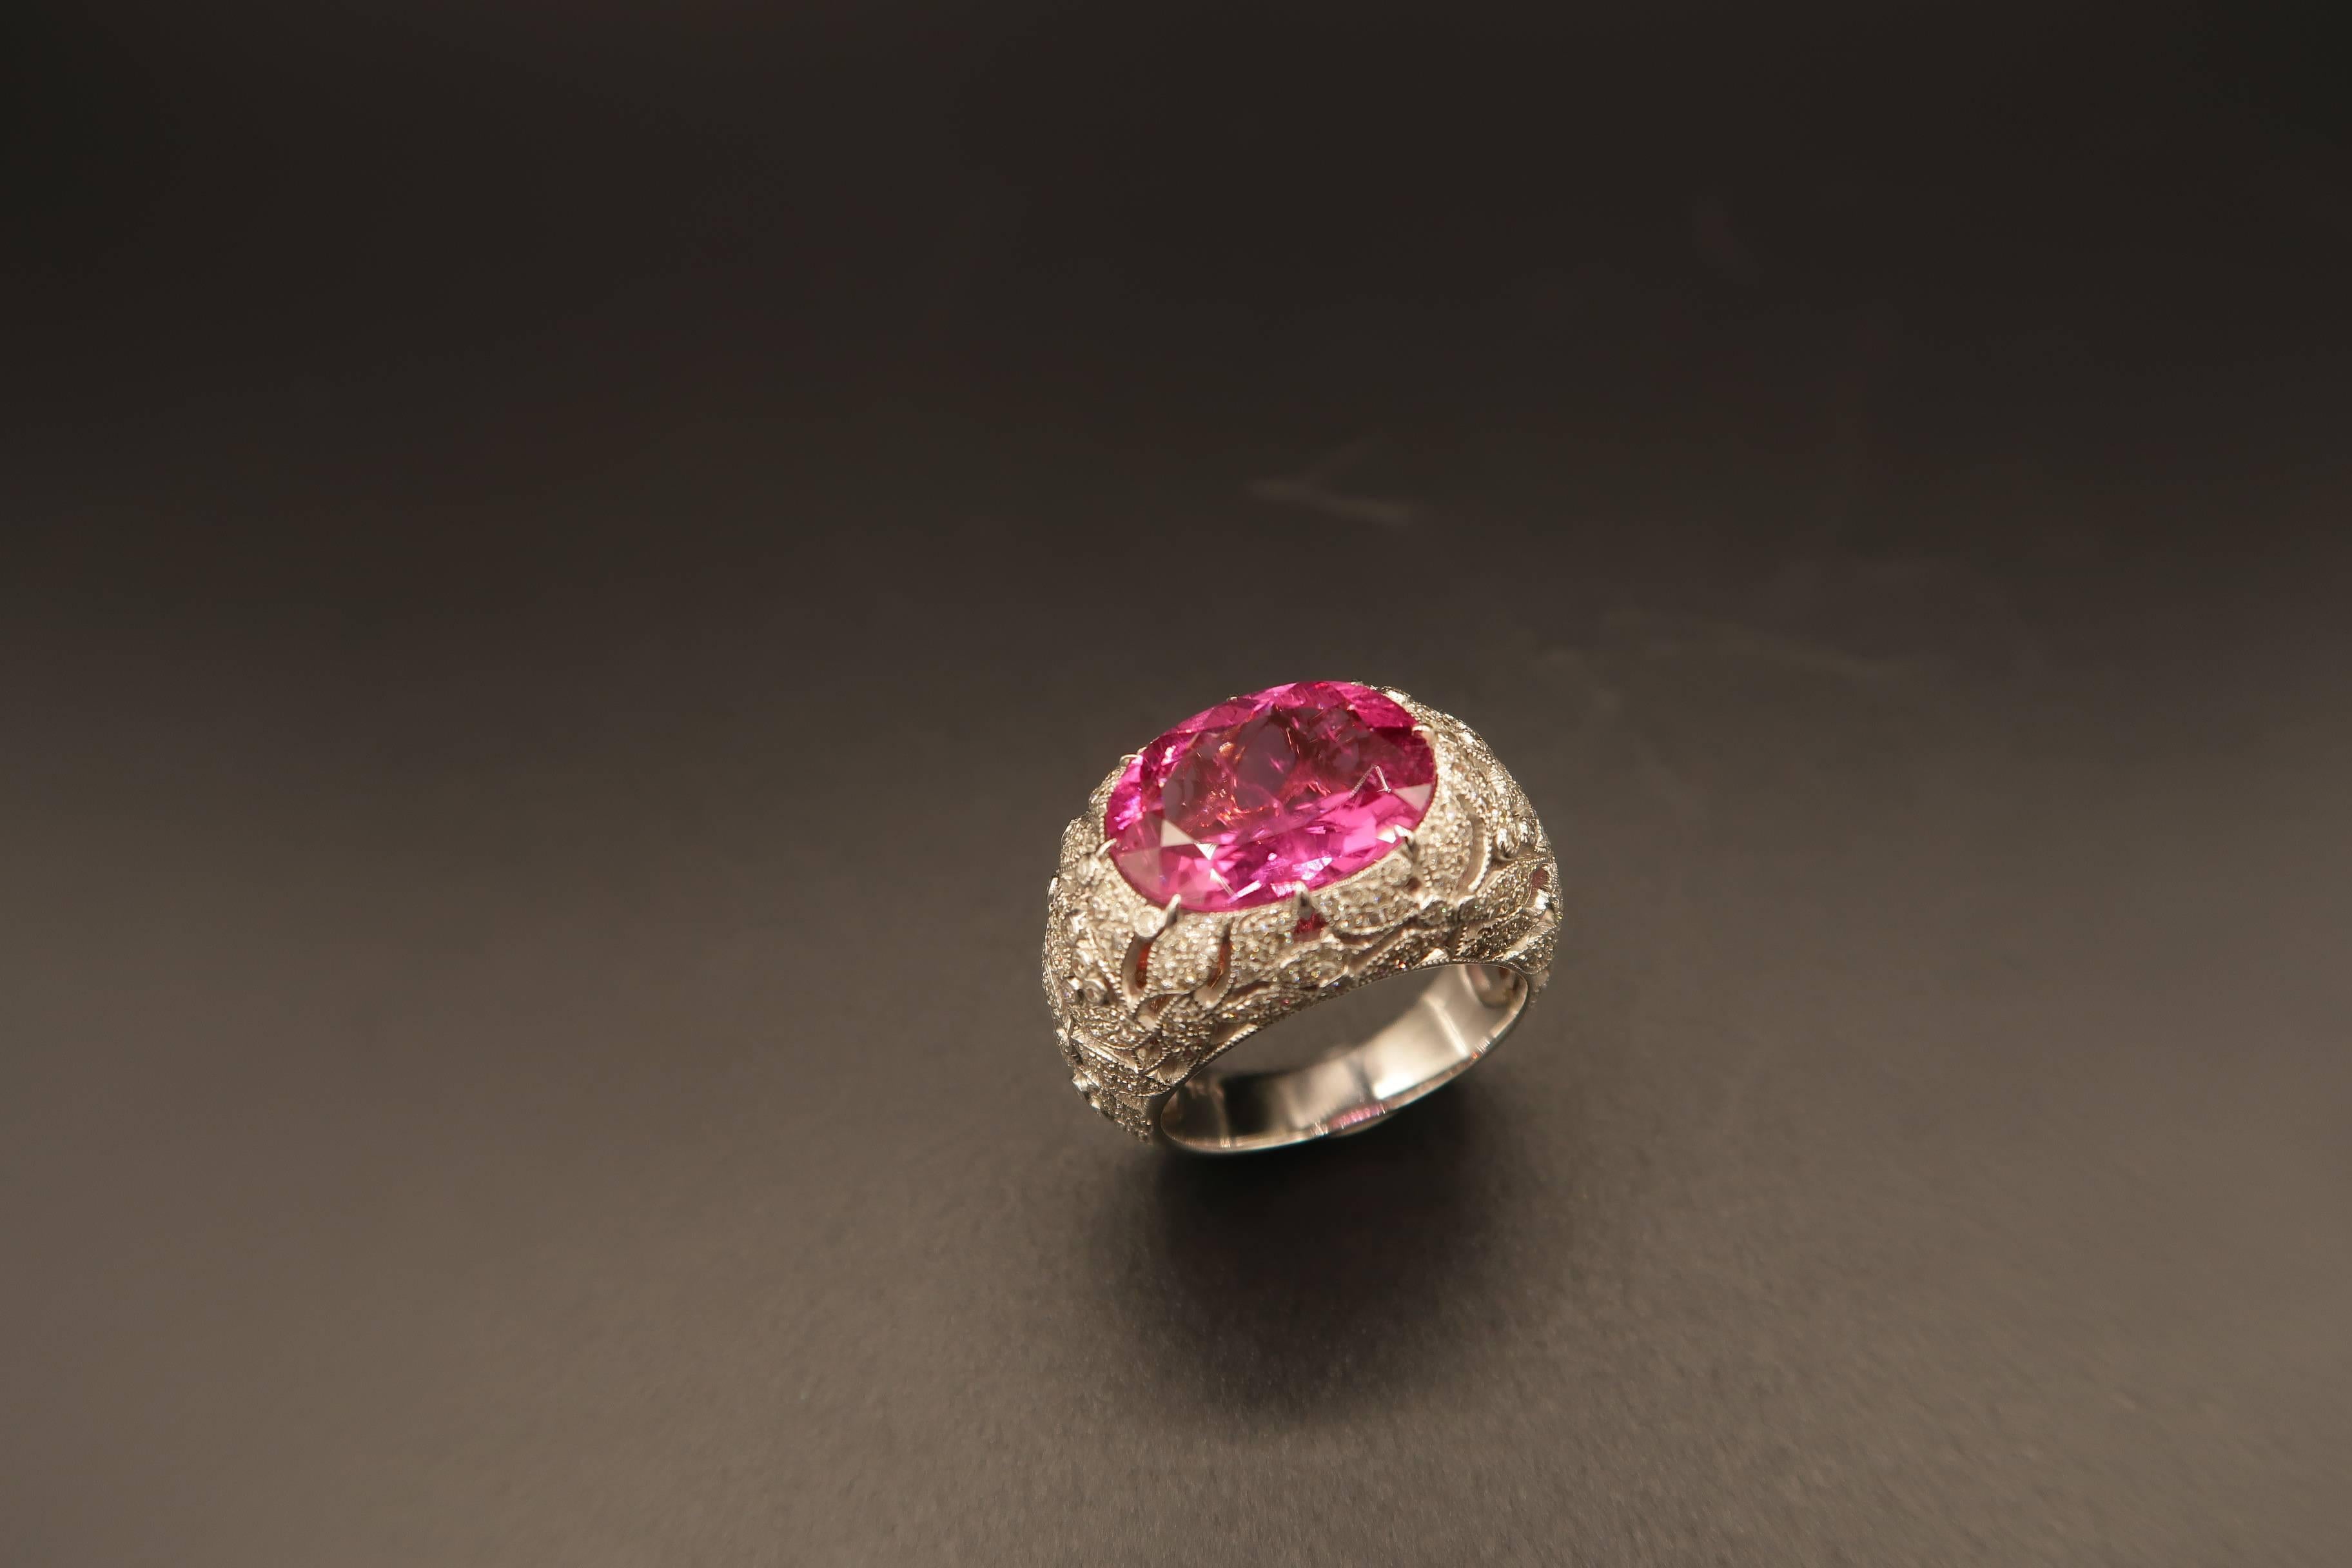 Pink Tourmaline Ring with Diamond Lacework in 18K White Gold
Gold : 11g. 18K White Gold
Diamond : 1.06ct. 
Pink Tourmaline: 5.56cts.

